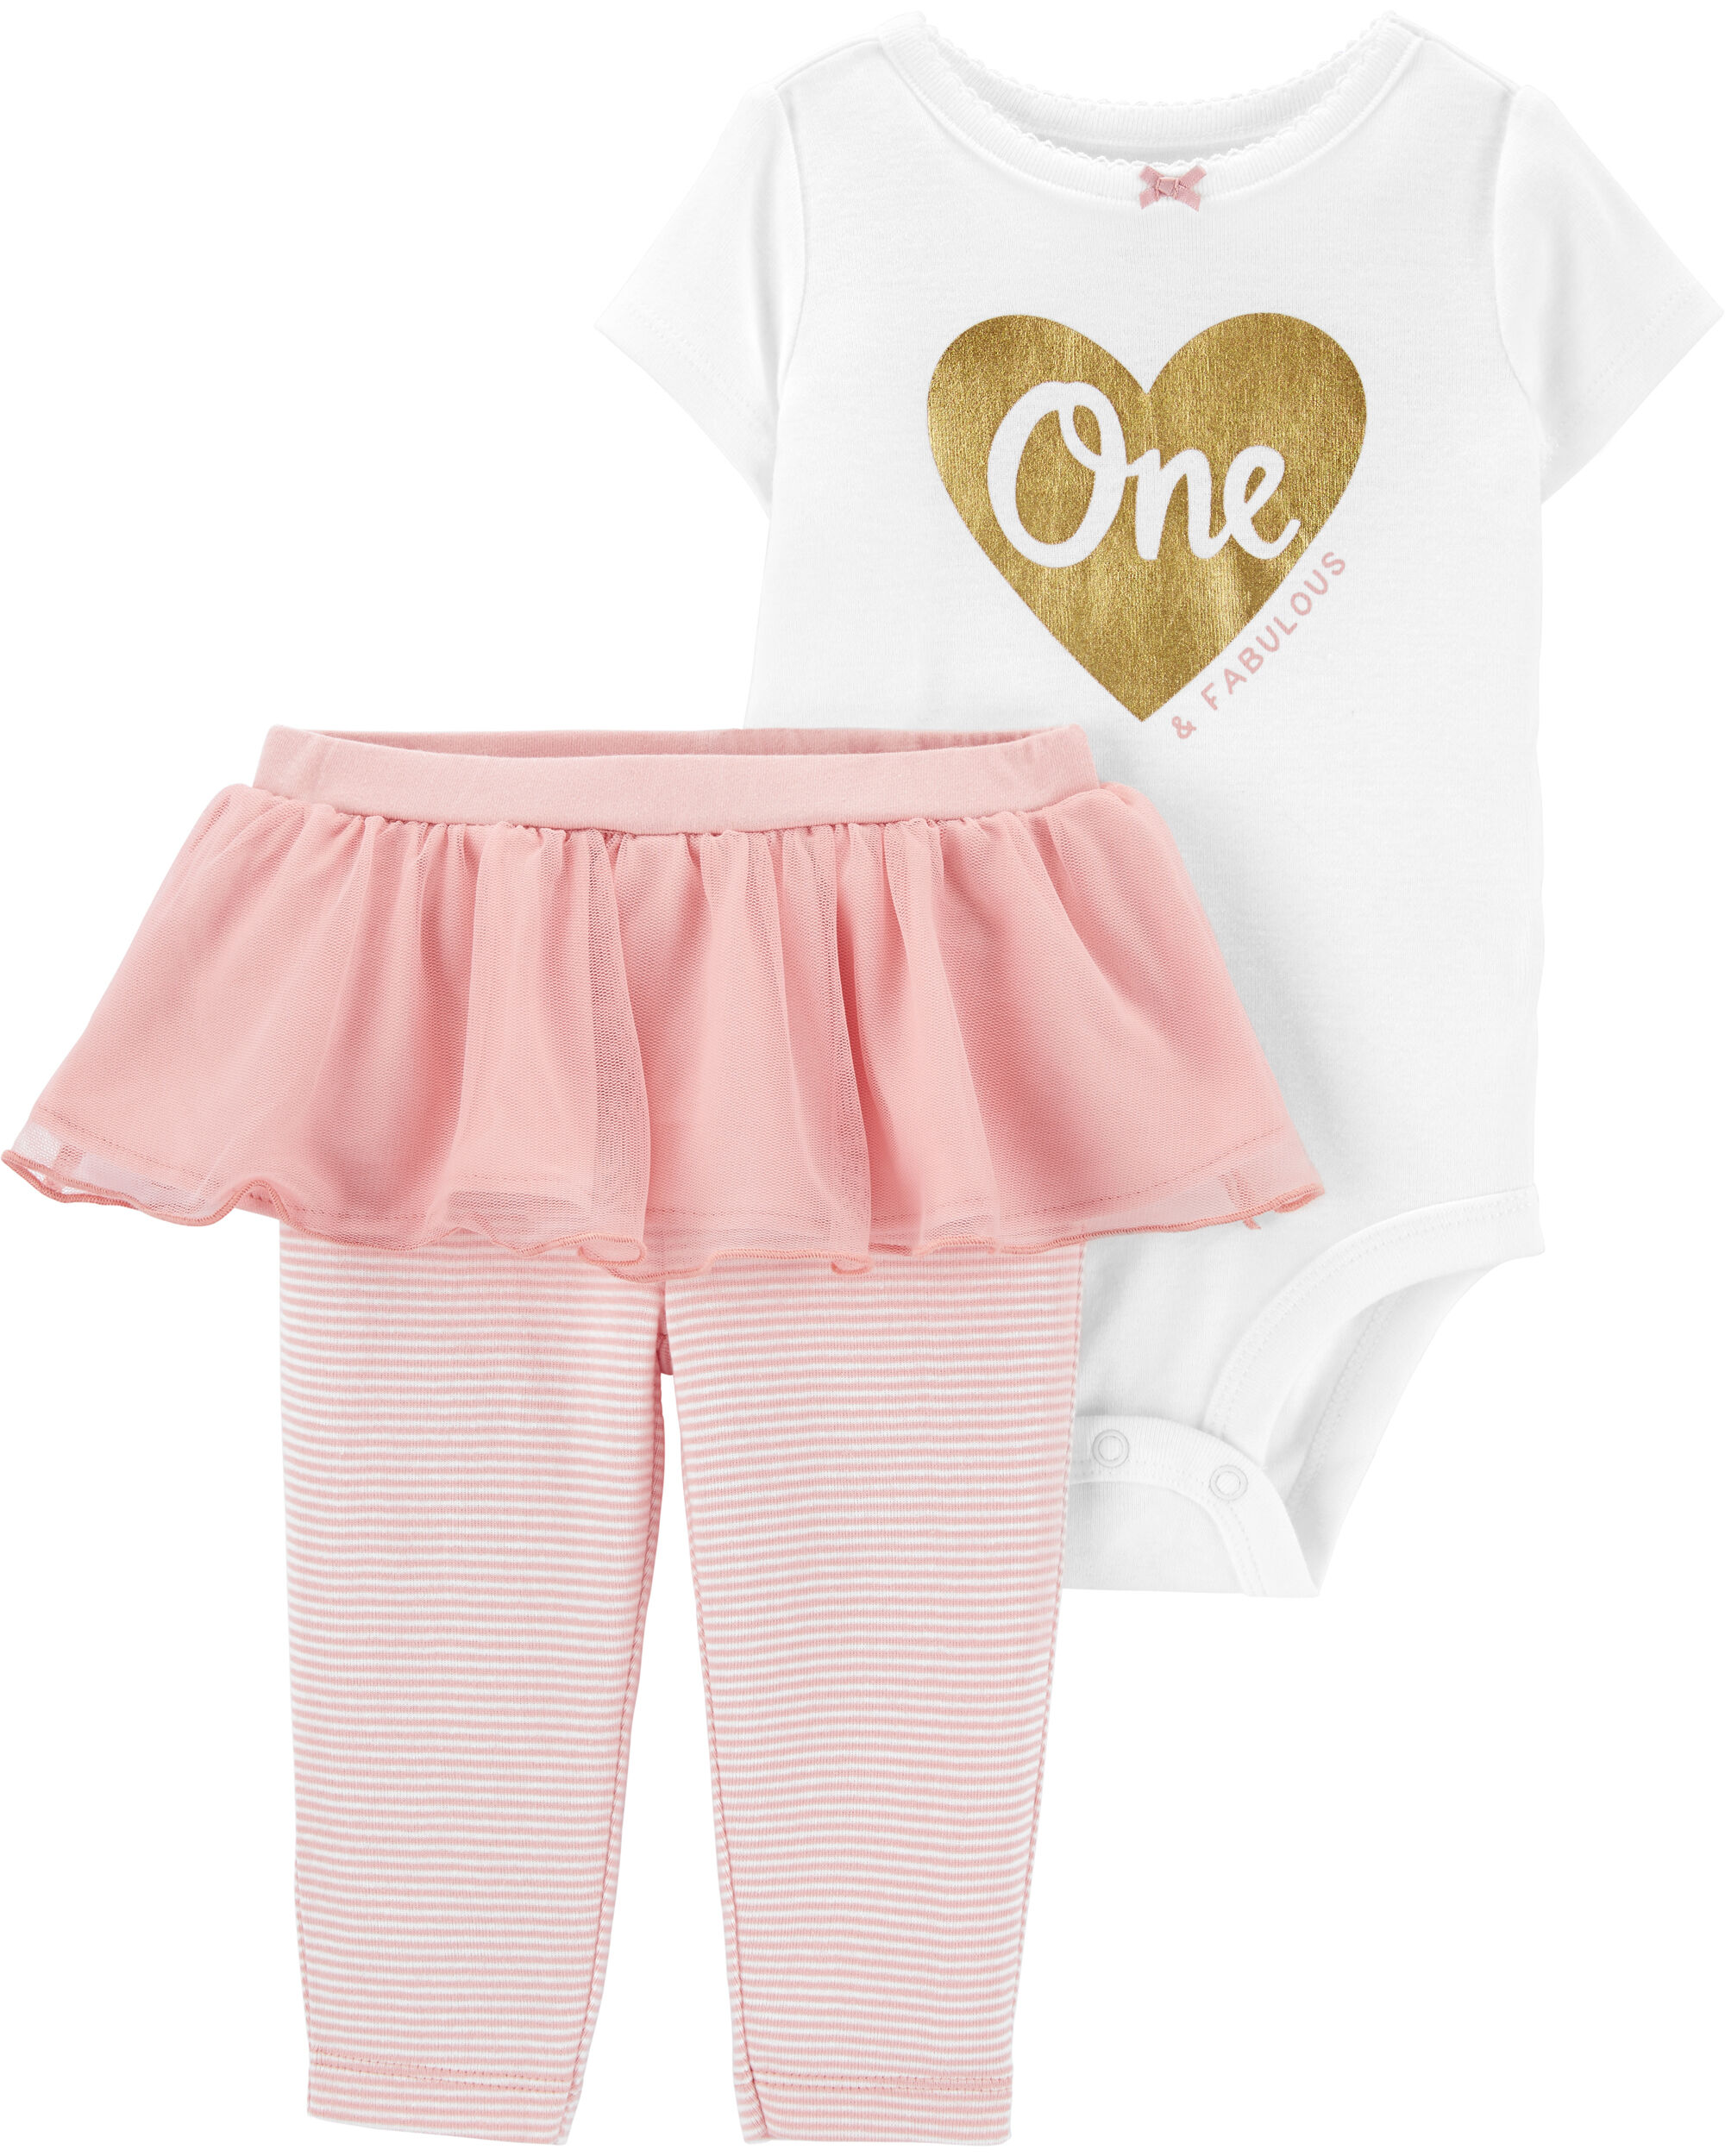 1st birthday outfits carters